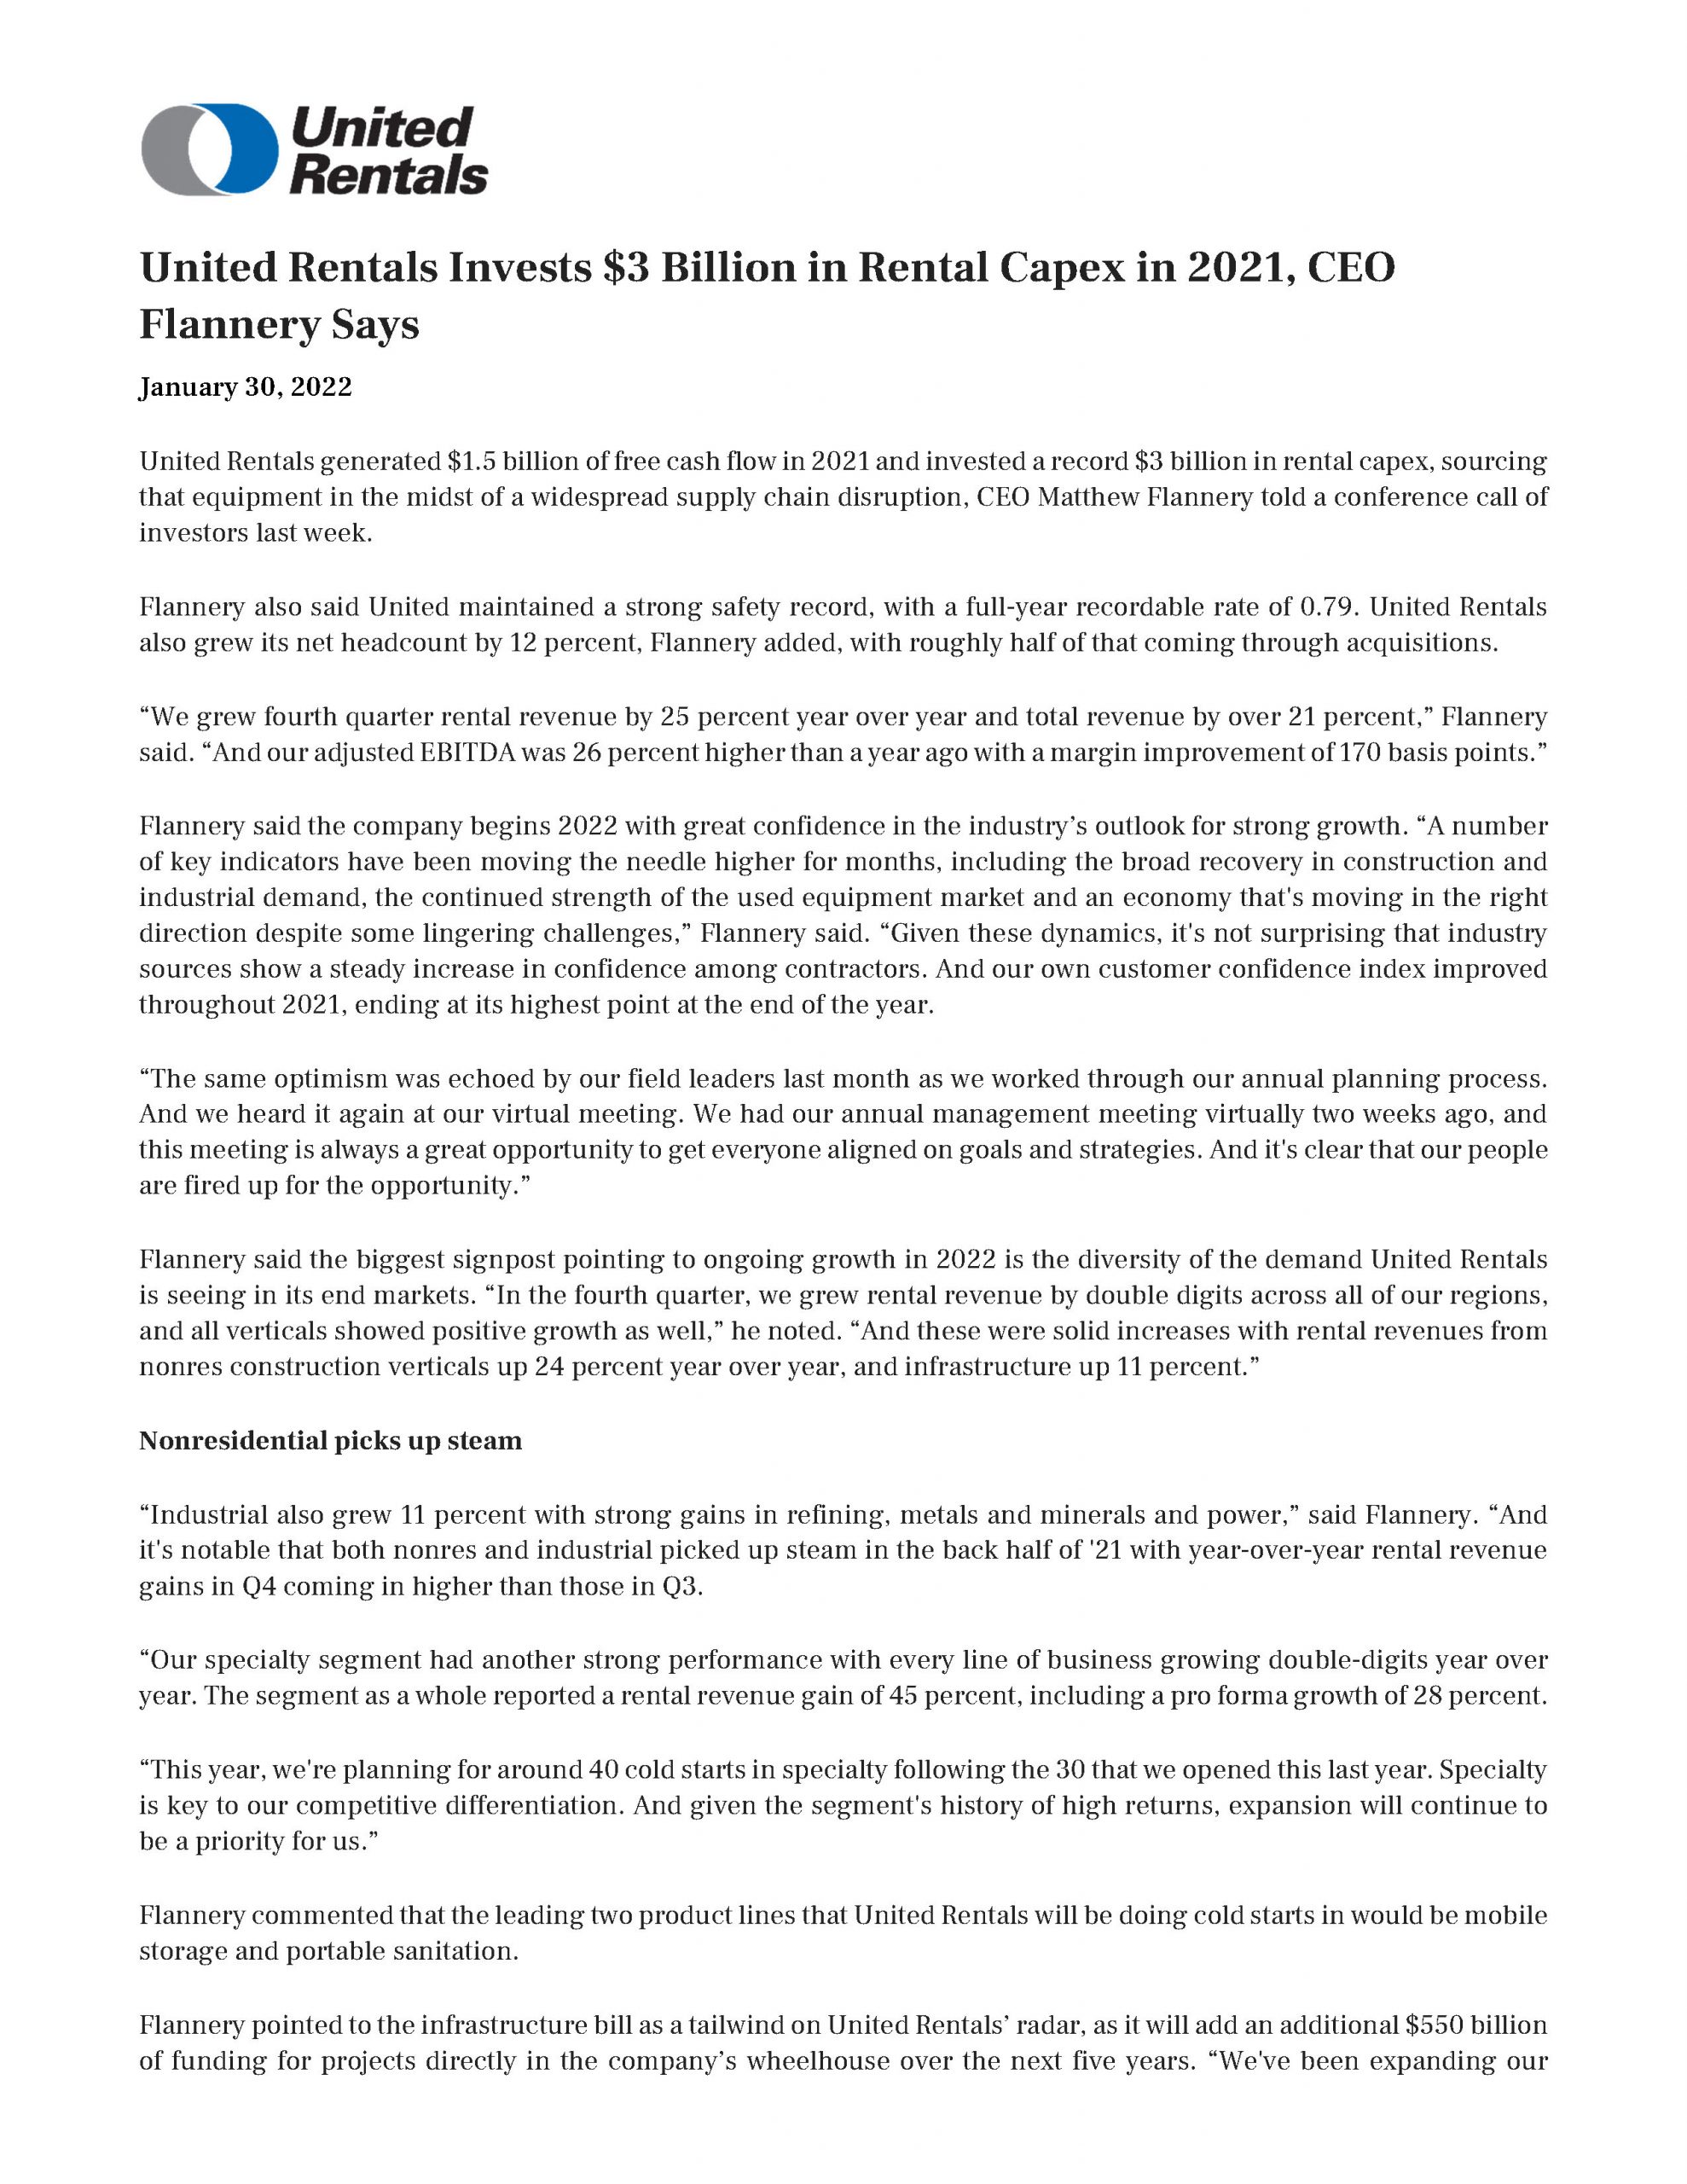 United Rentals Invests $3 Billion in Rental Capex in 2021 CEO Flannery Says 1.30.2022_Page_1